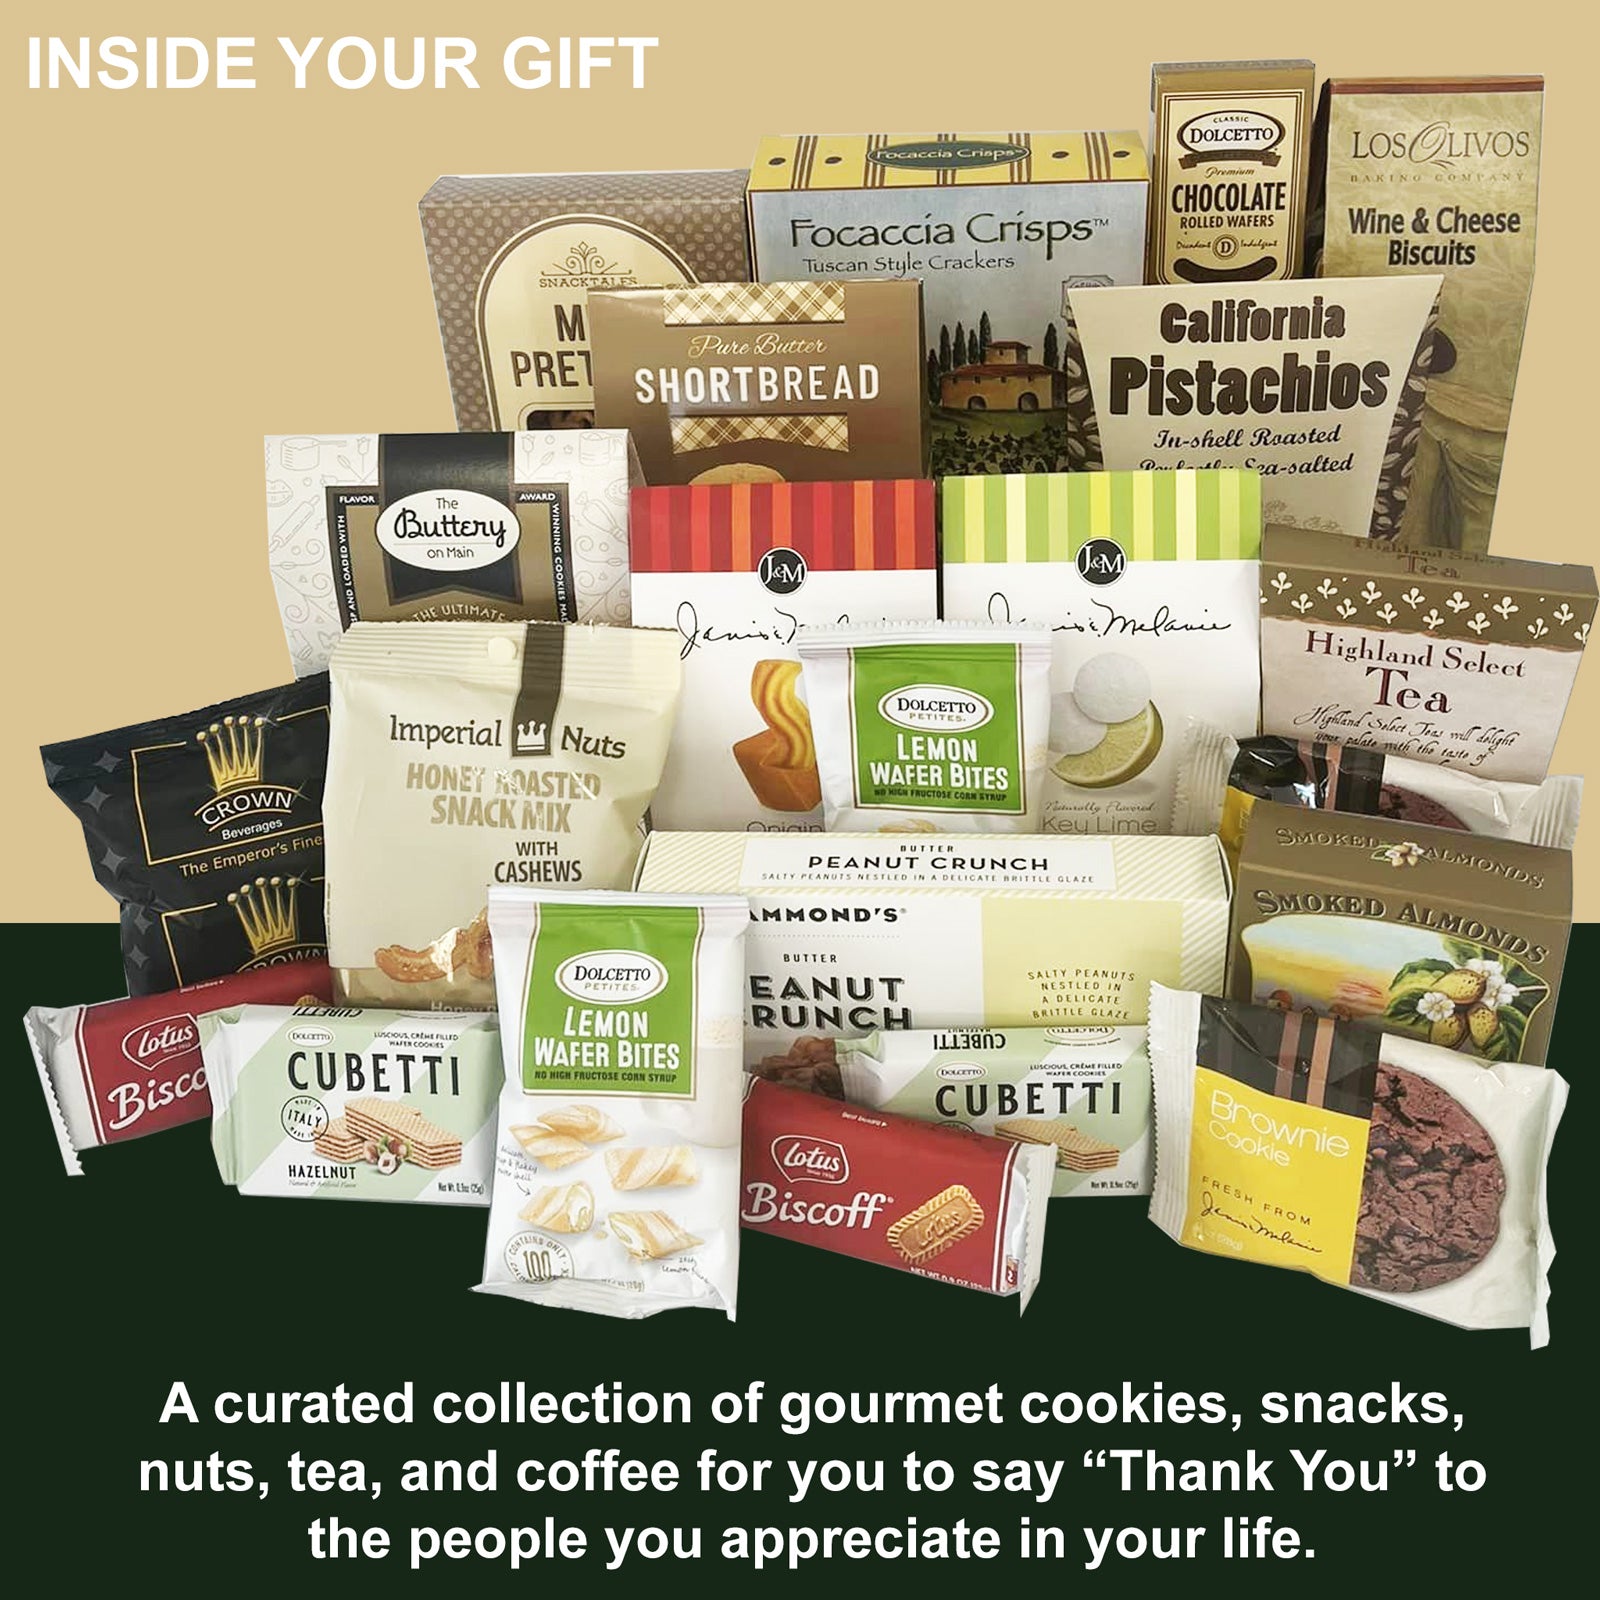 Thank You Book & Chocolates, Food Gift Baskets: Olive & Cocoa, LLC